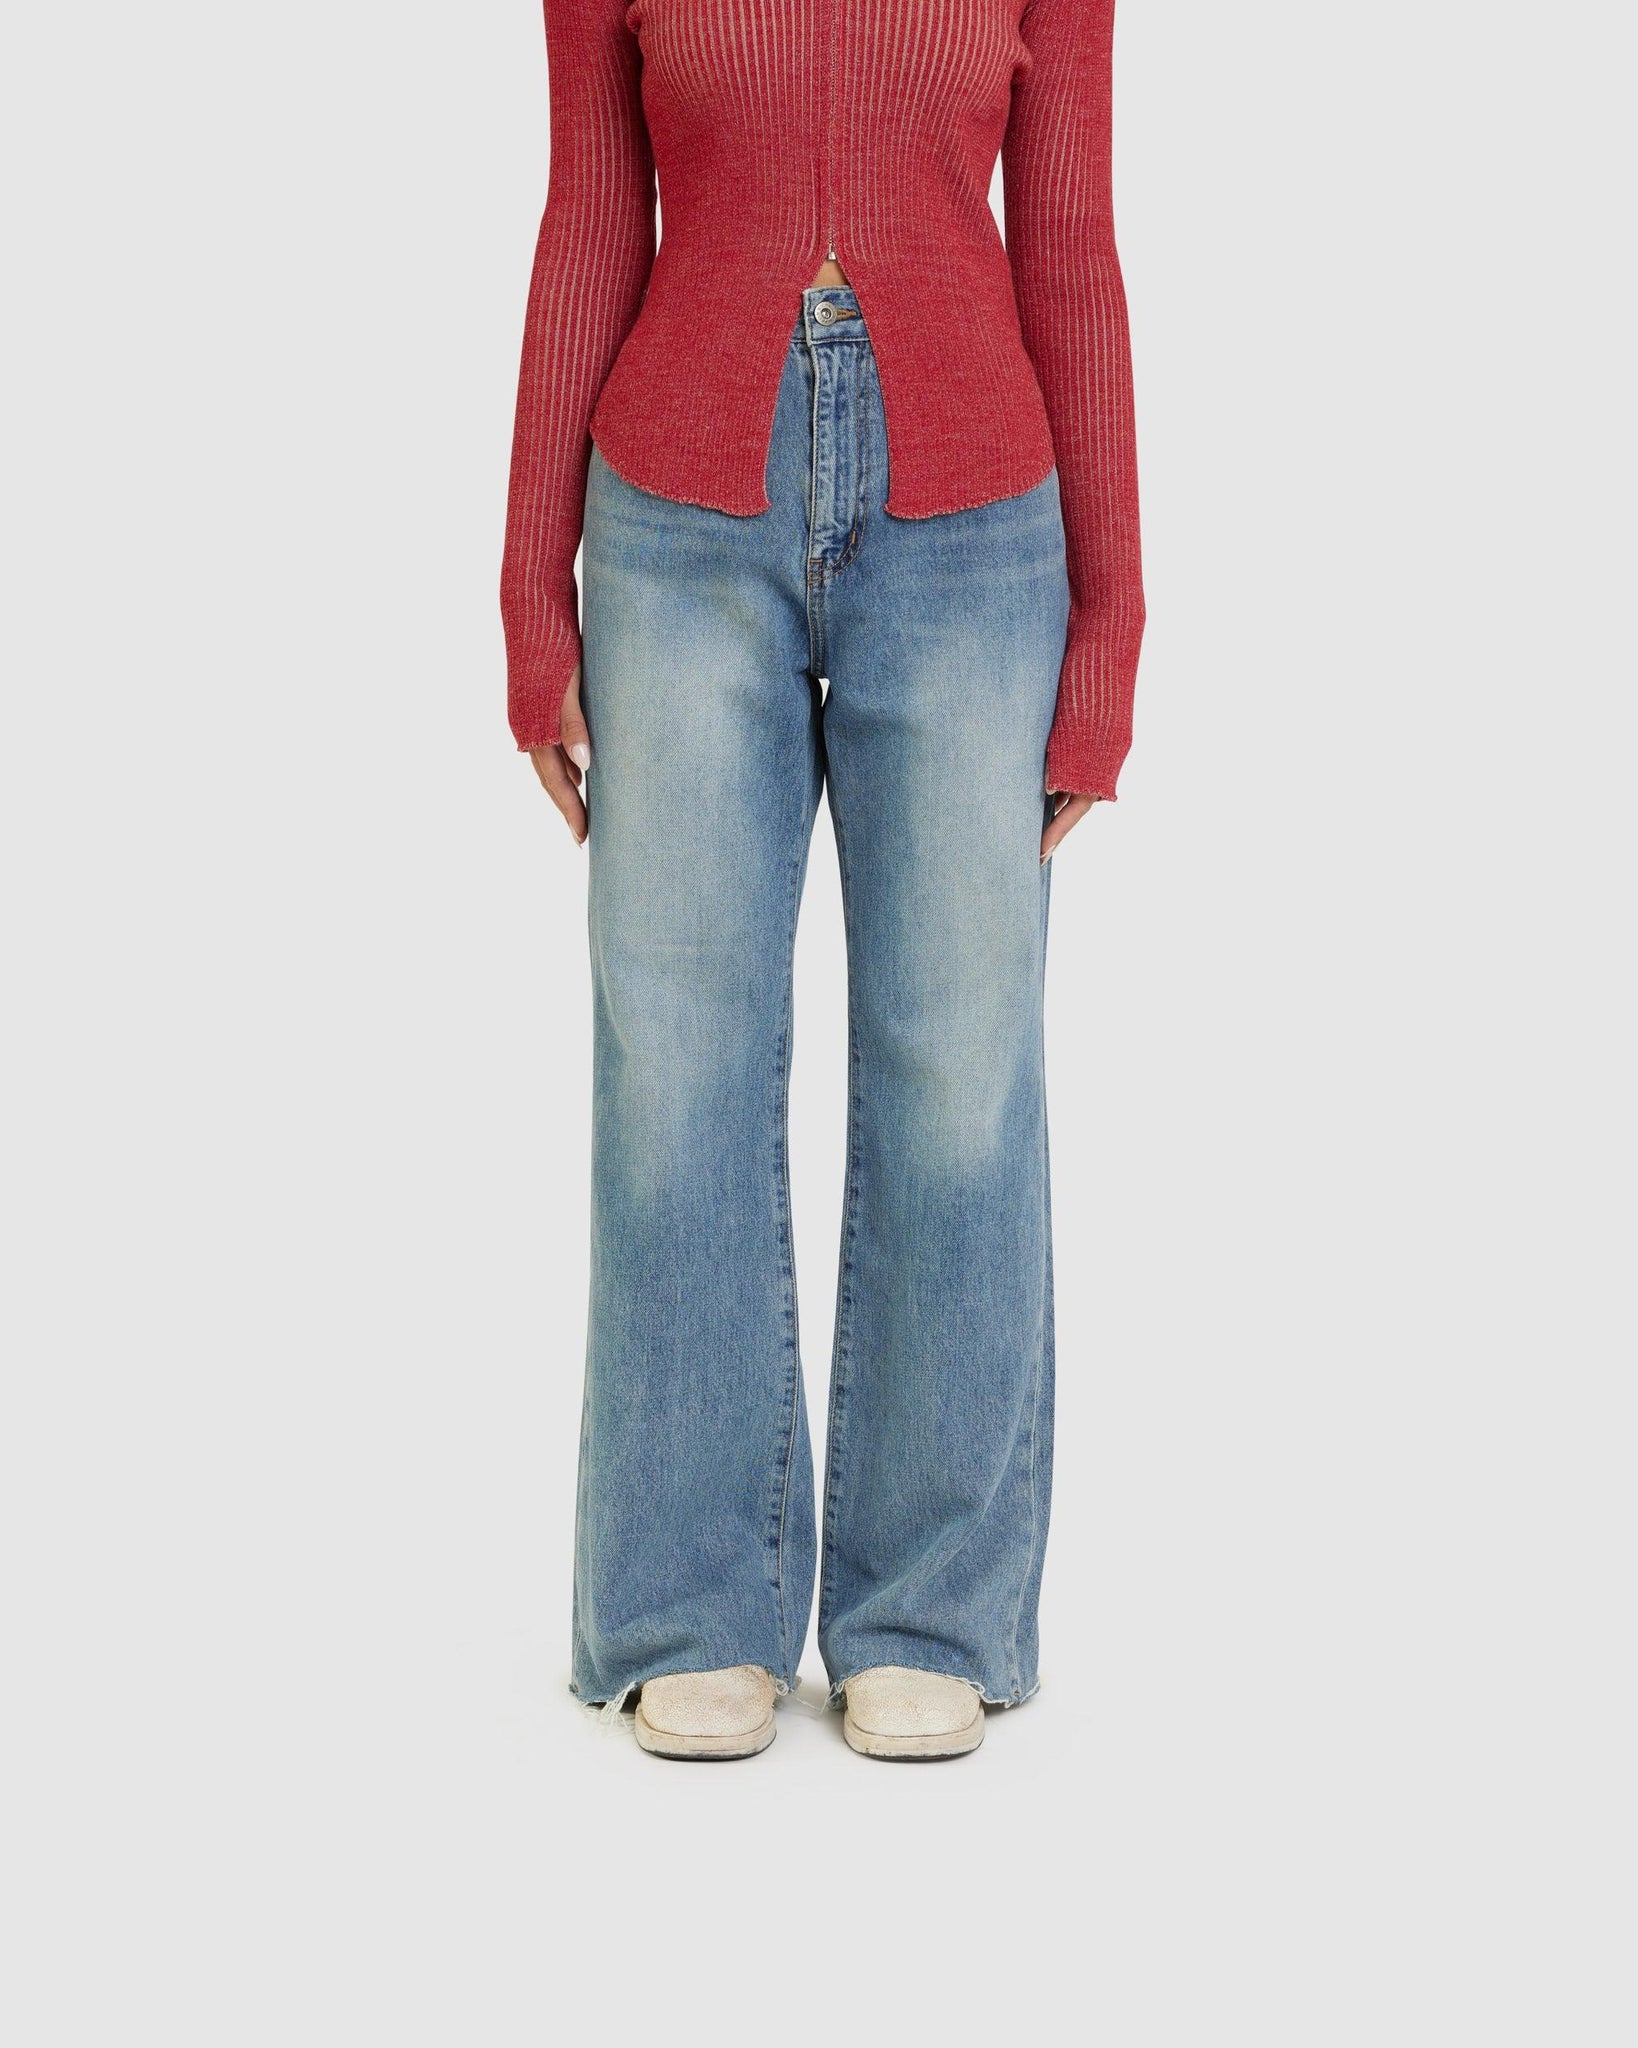 Rhombus Boyfriend Jeans - {{ collection.title }} - Chinatown Country Club 